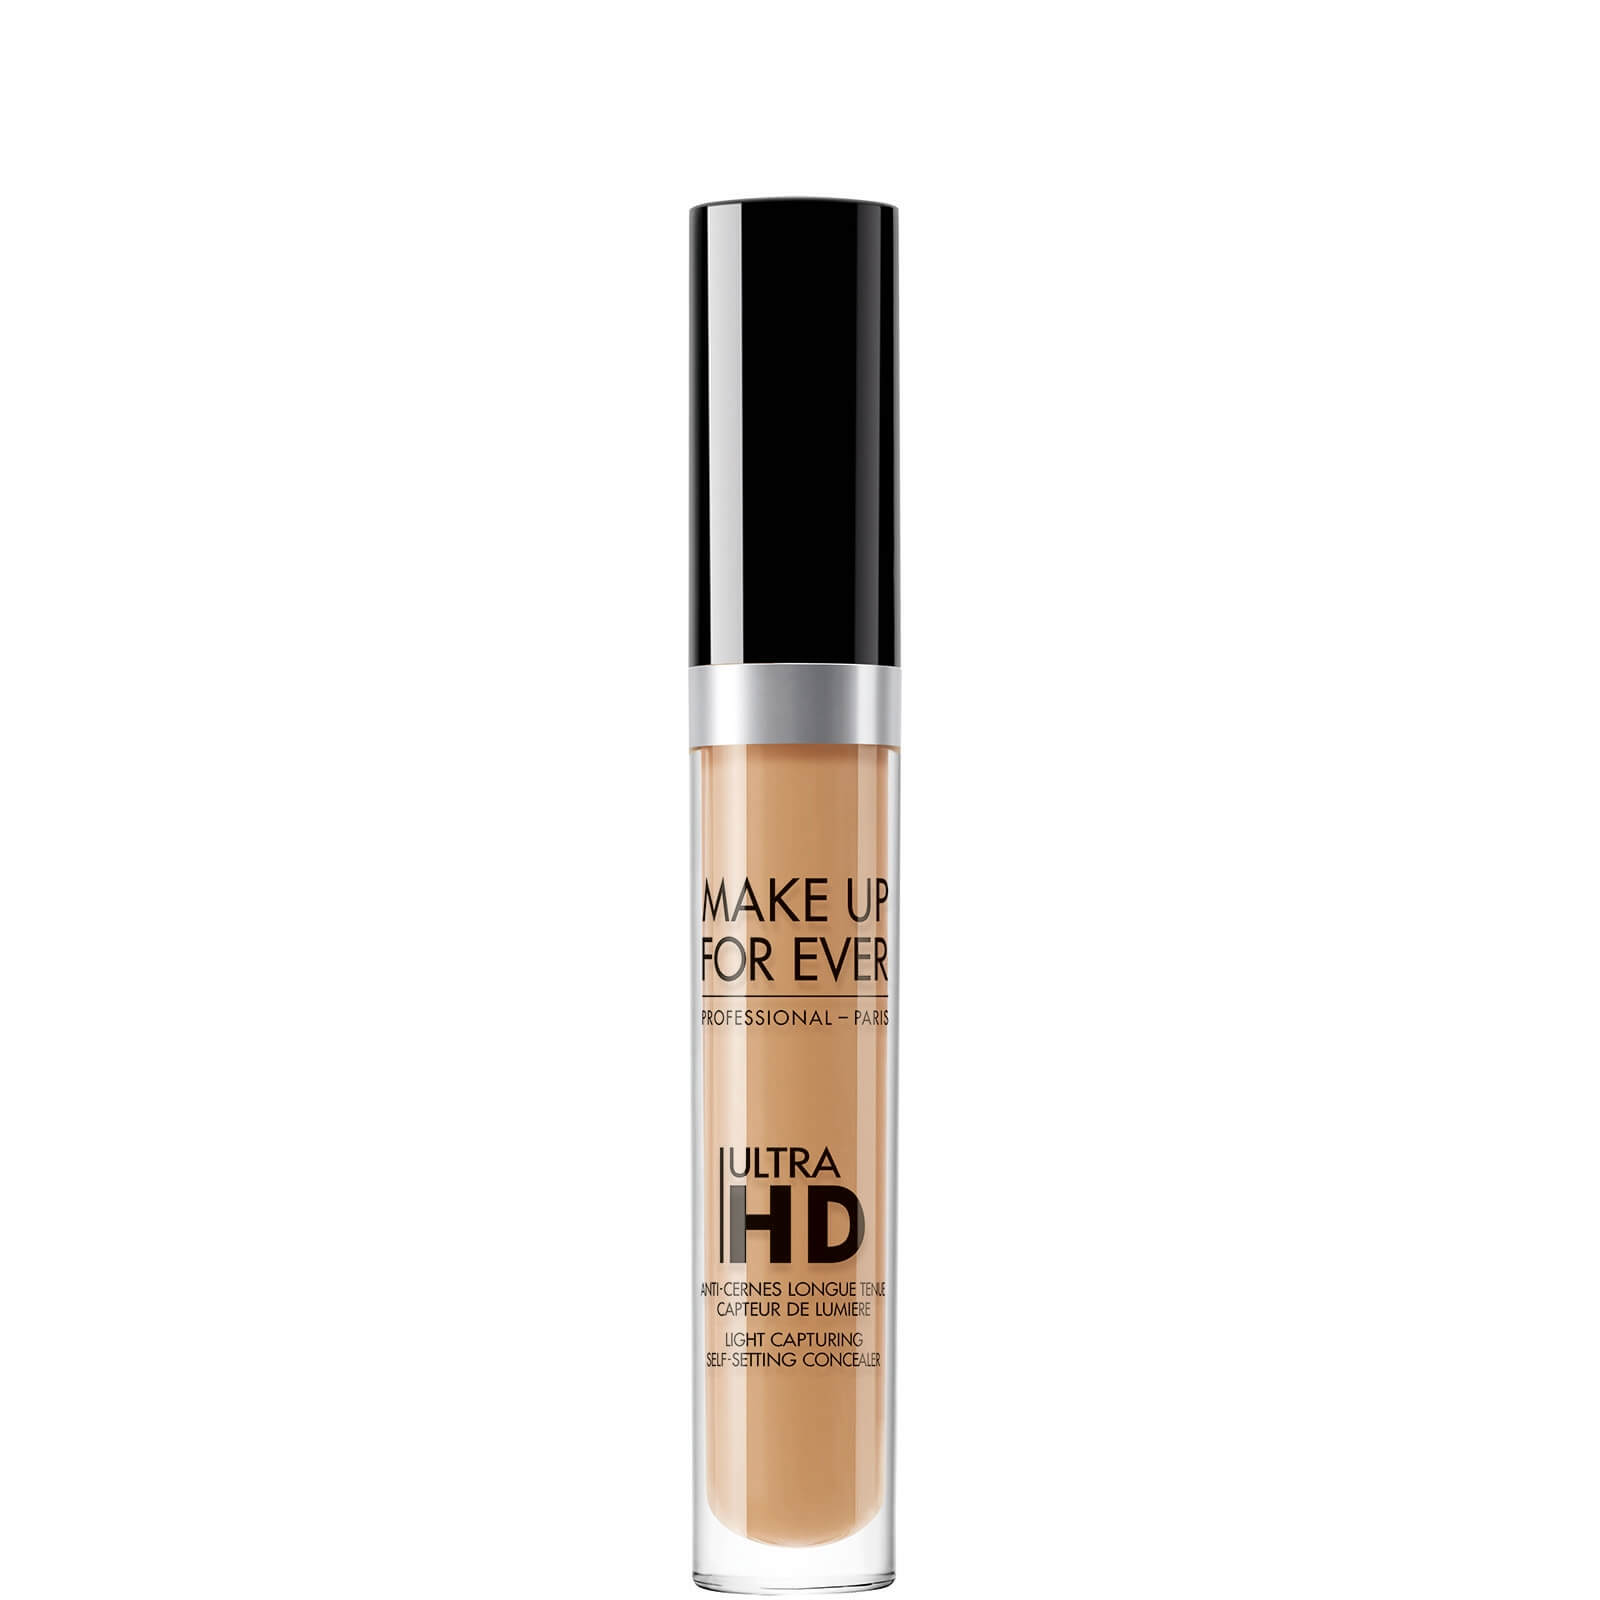 MAKE UP FOR EVER ultra Hd Self-Setting Concealer 5ml (Various Shades) - - 34 Golden Sand